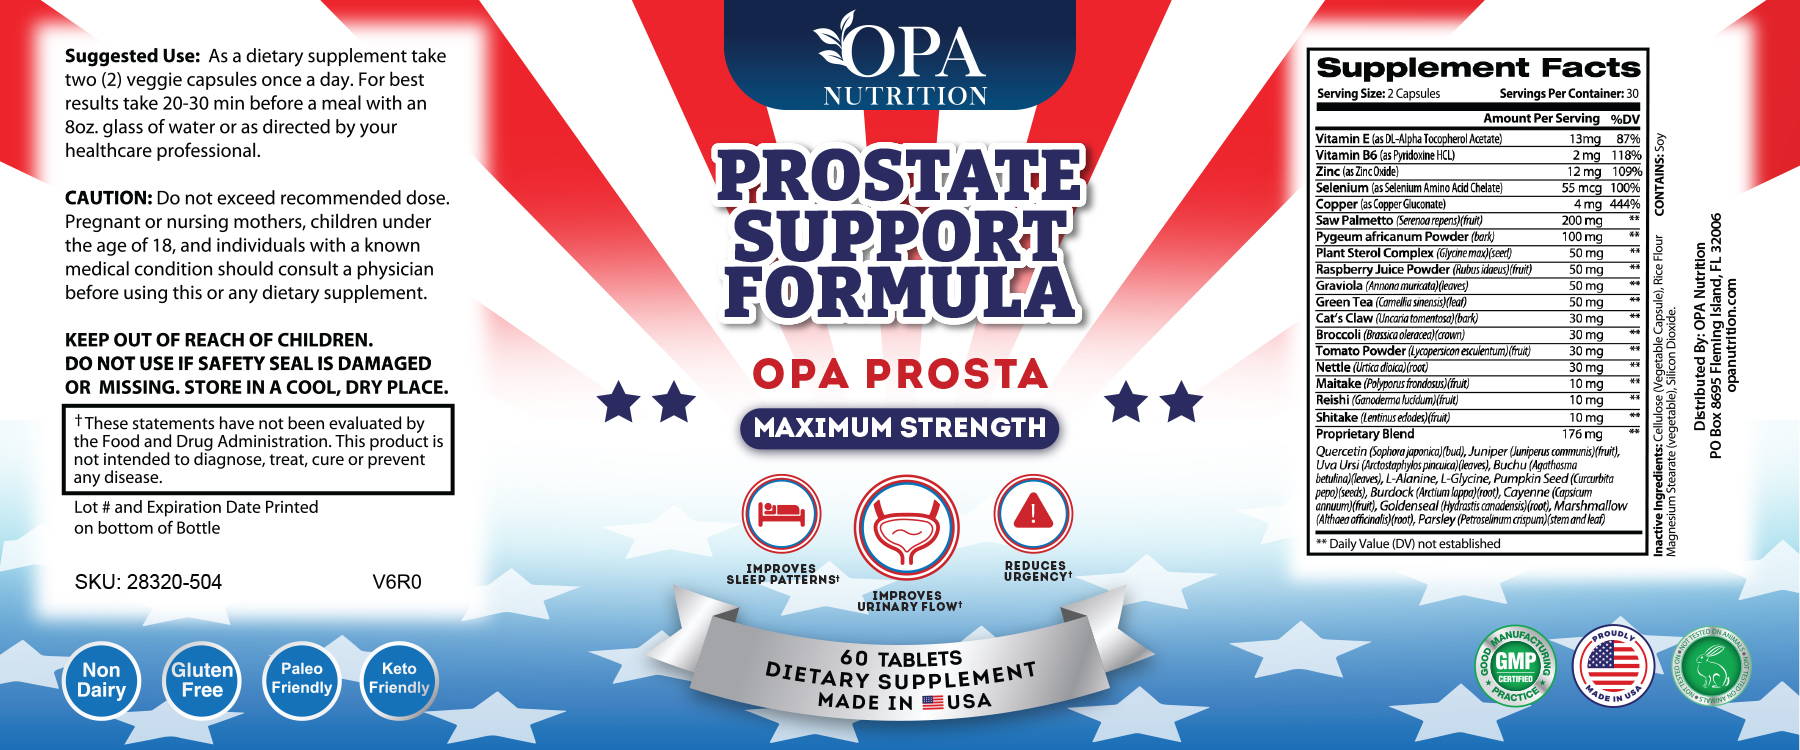 OPA NUTRITION PROSTATE SUPPLEMENT LABELS and DIRECTIONS